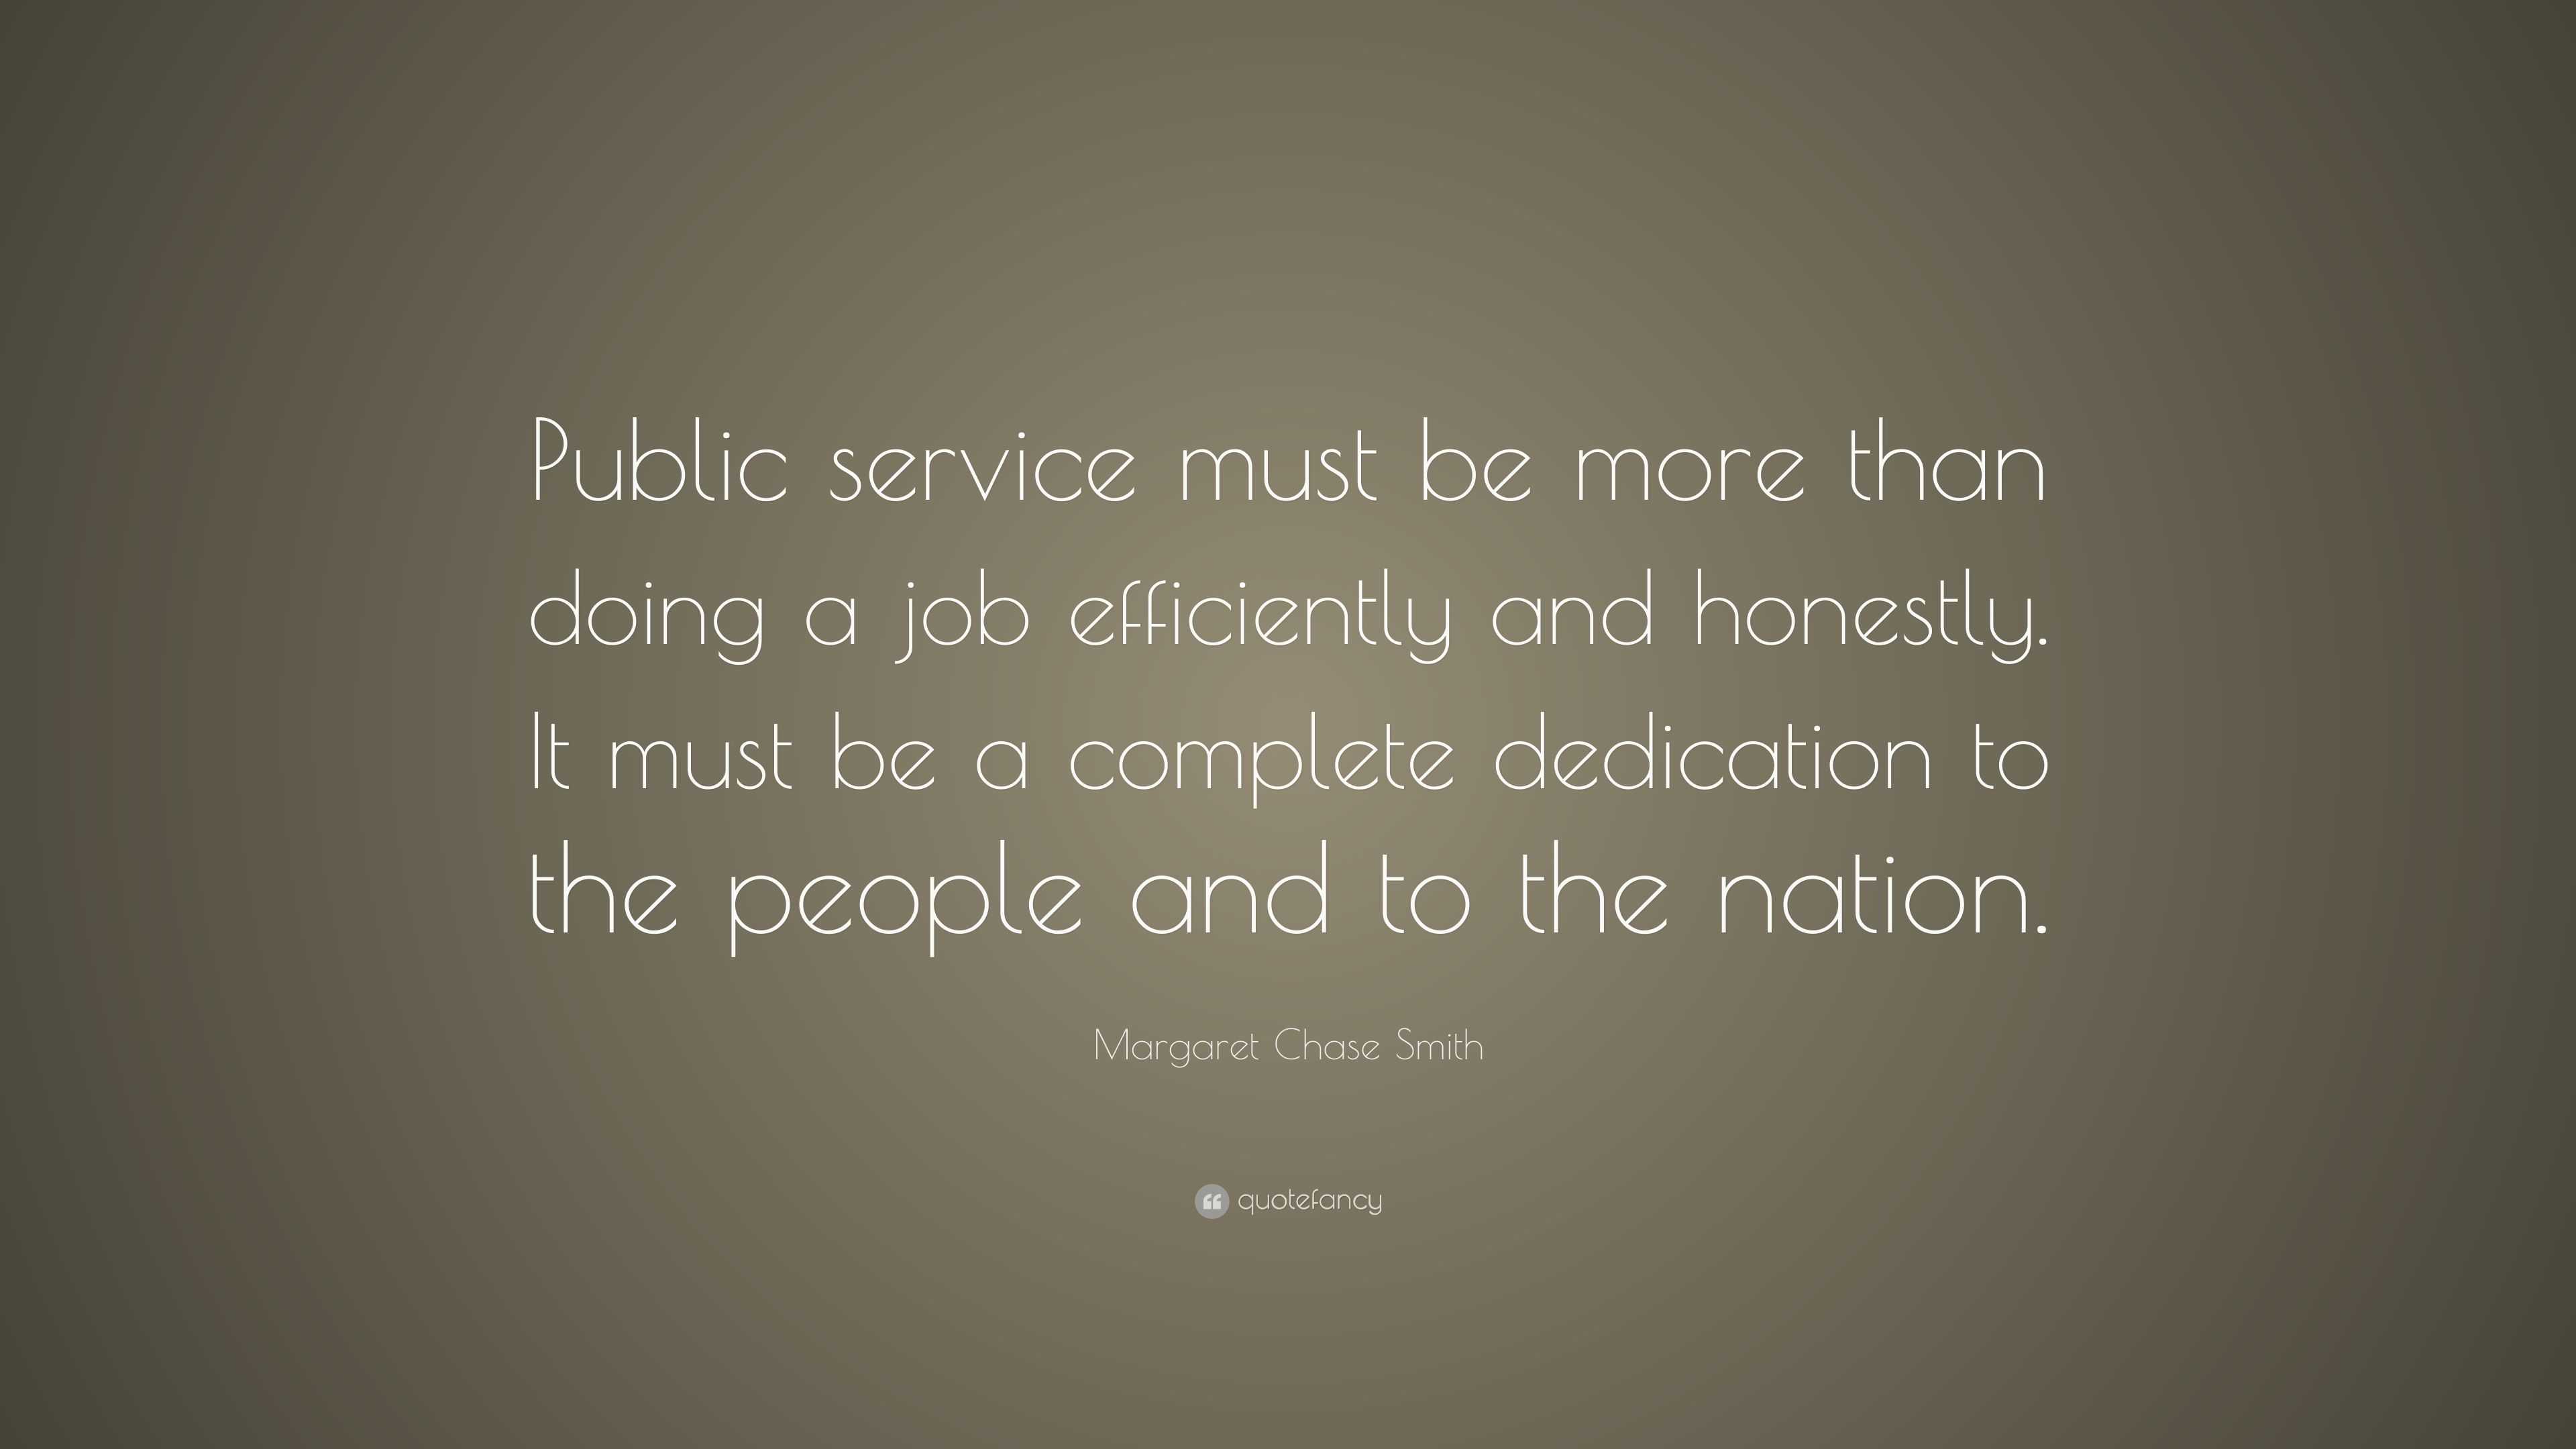 Margaret Chase Smith Quote: “Public service must be more than doing a ...